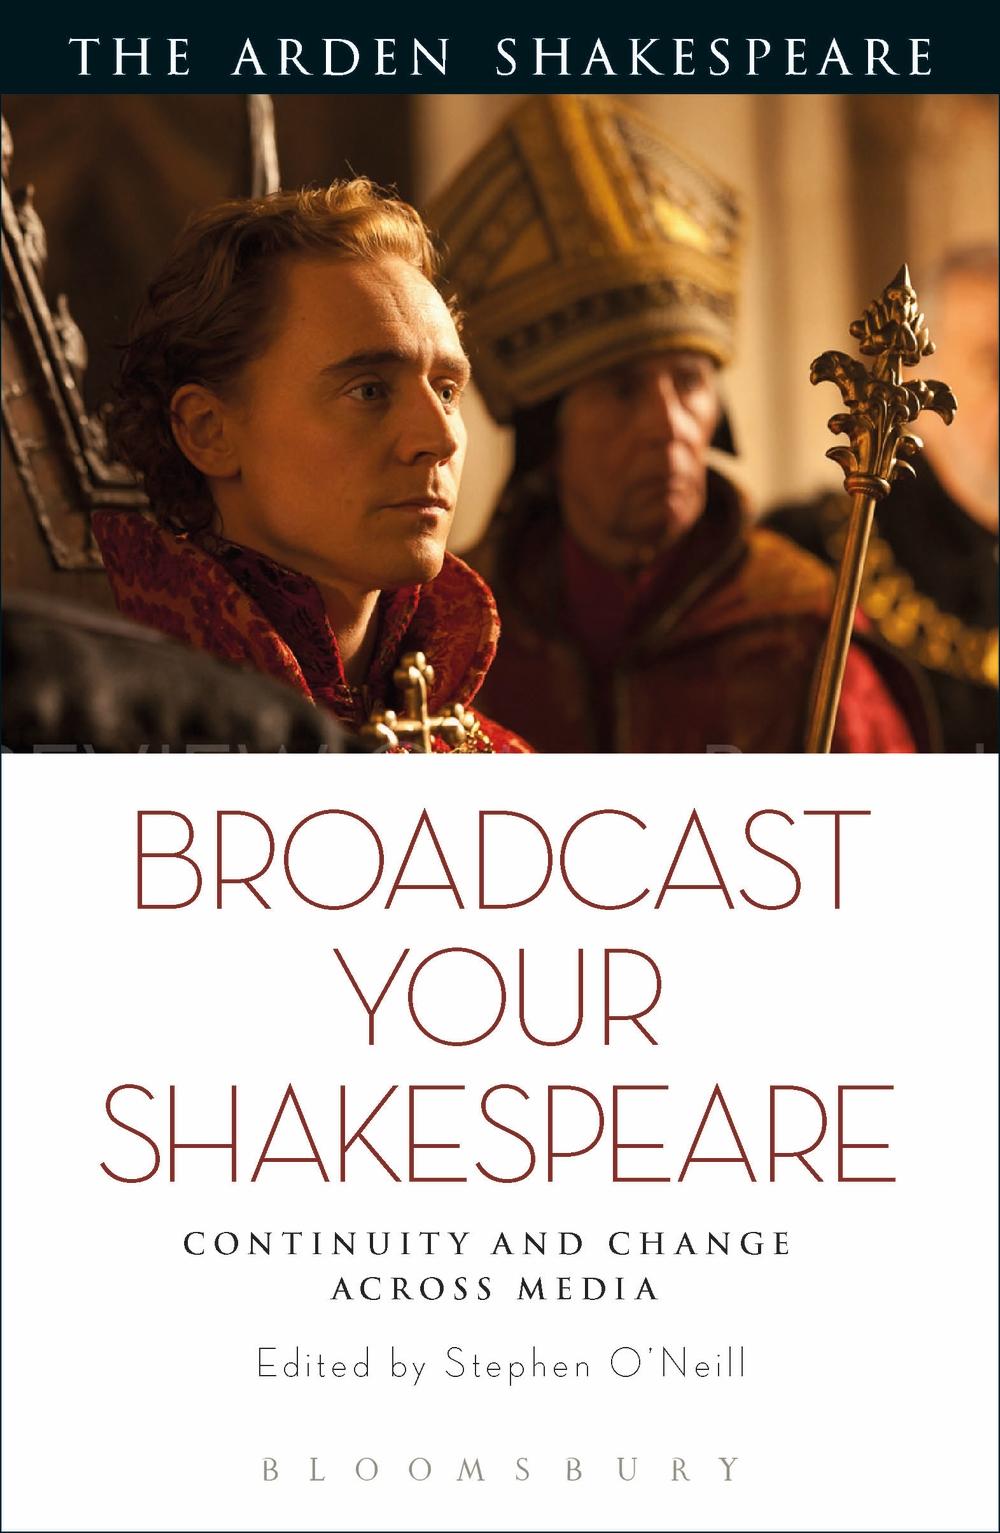 Broadcast your Shakespeare -  